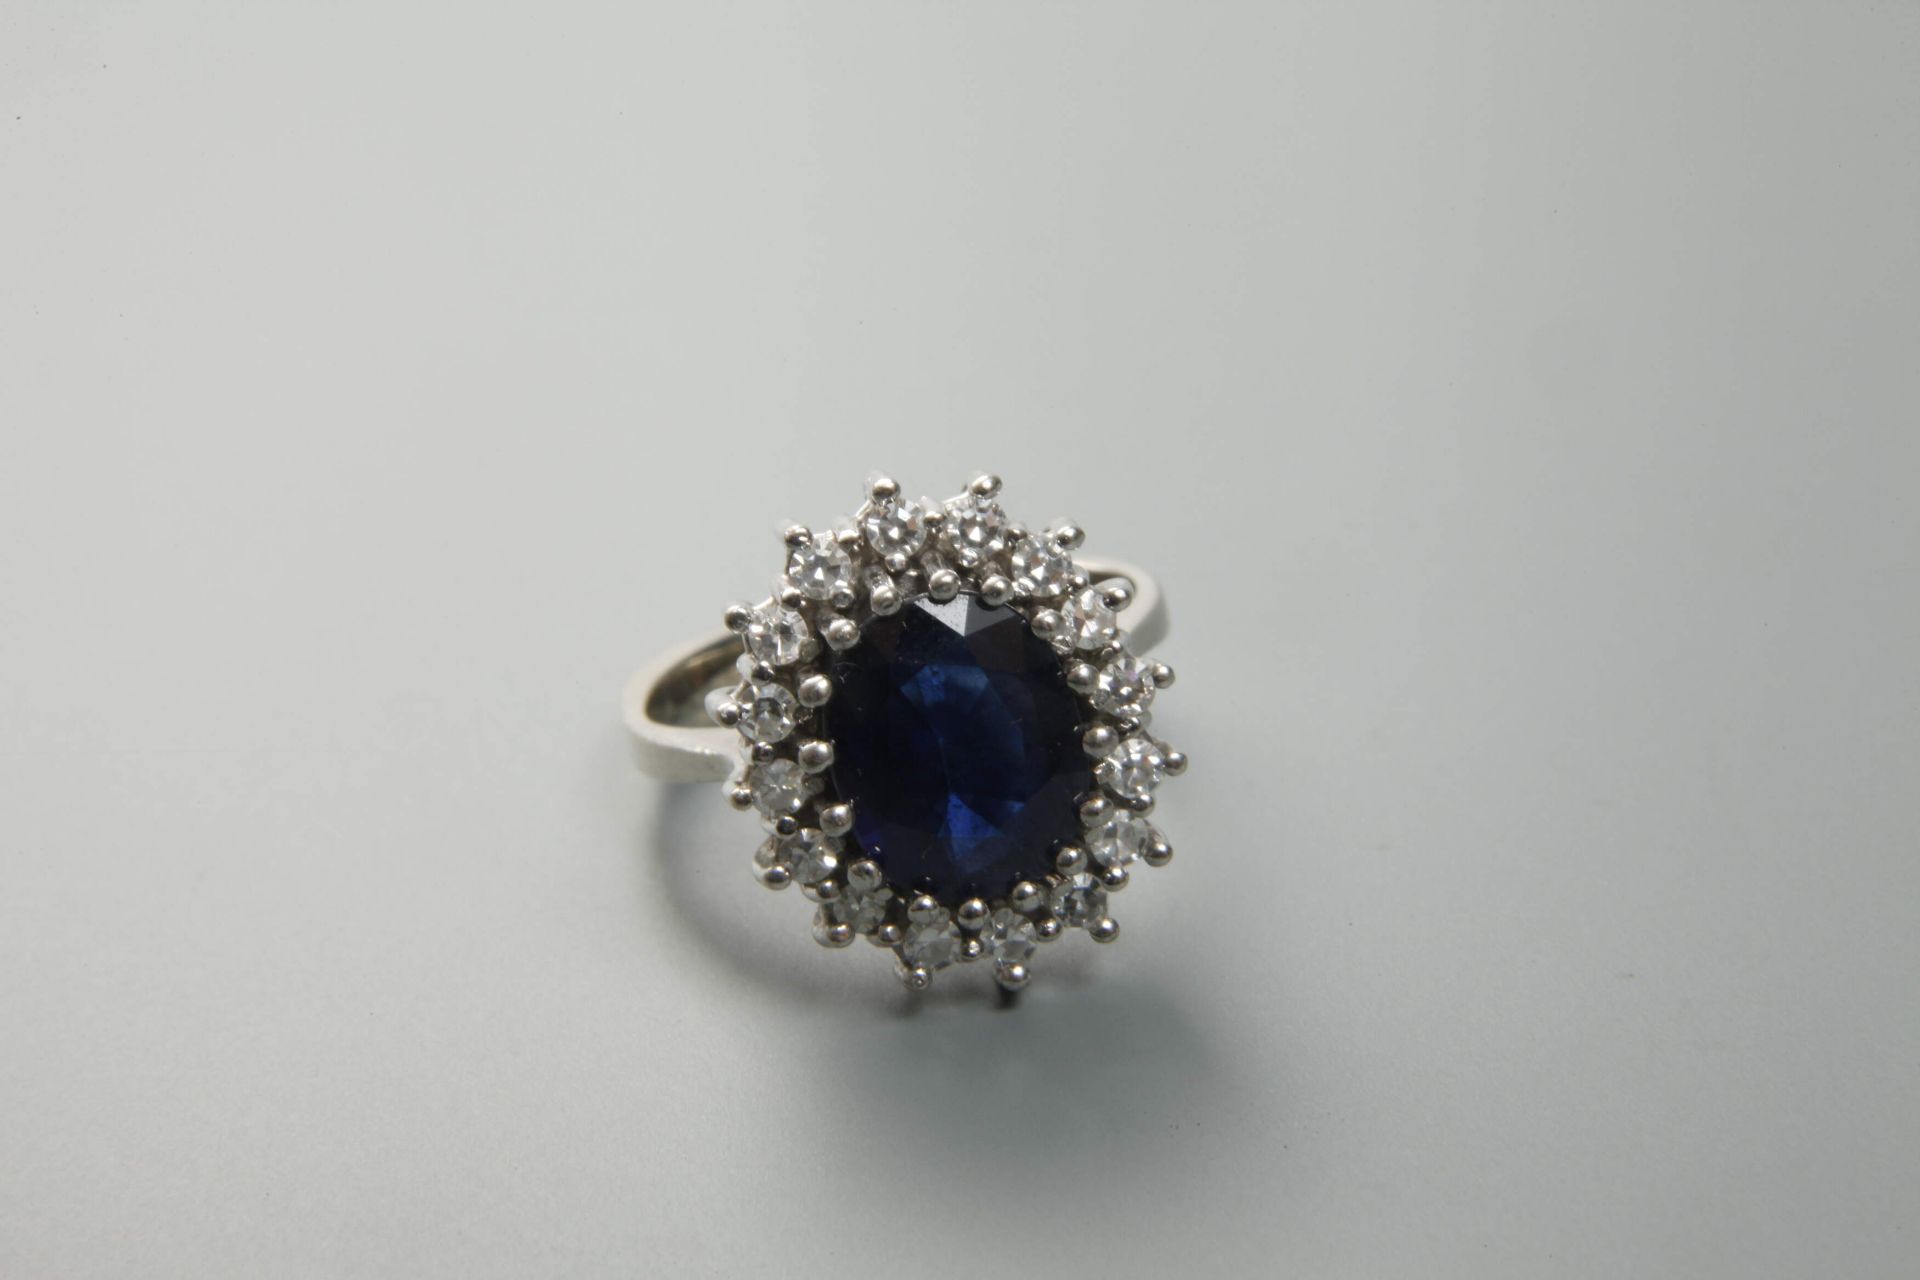 Lady's ring with sapphire and diamonds - Image 2 of 3